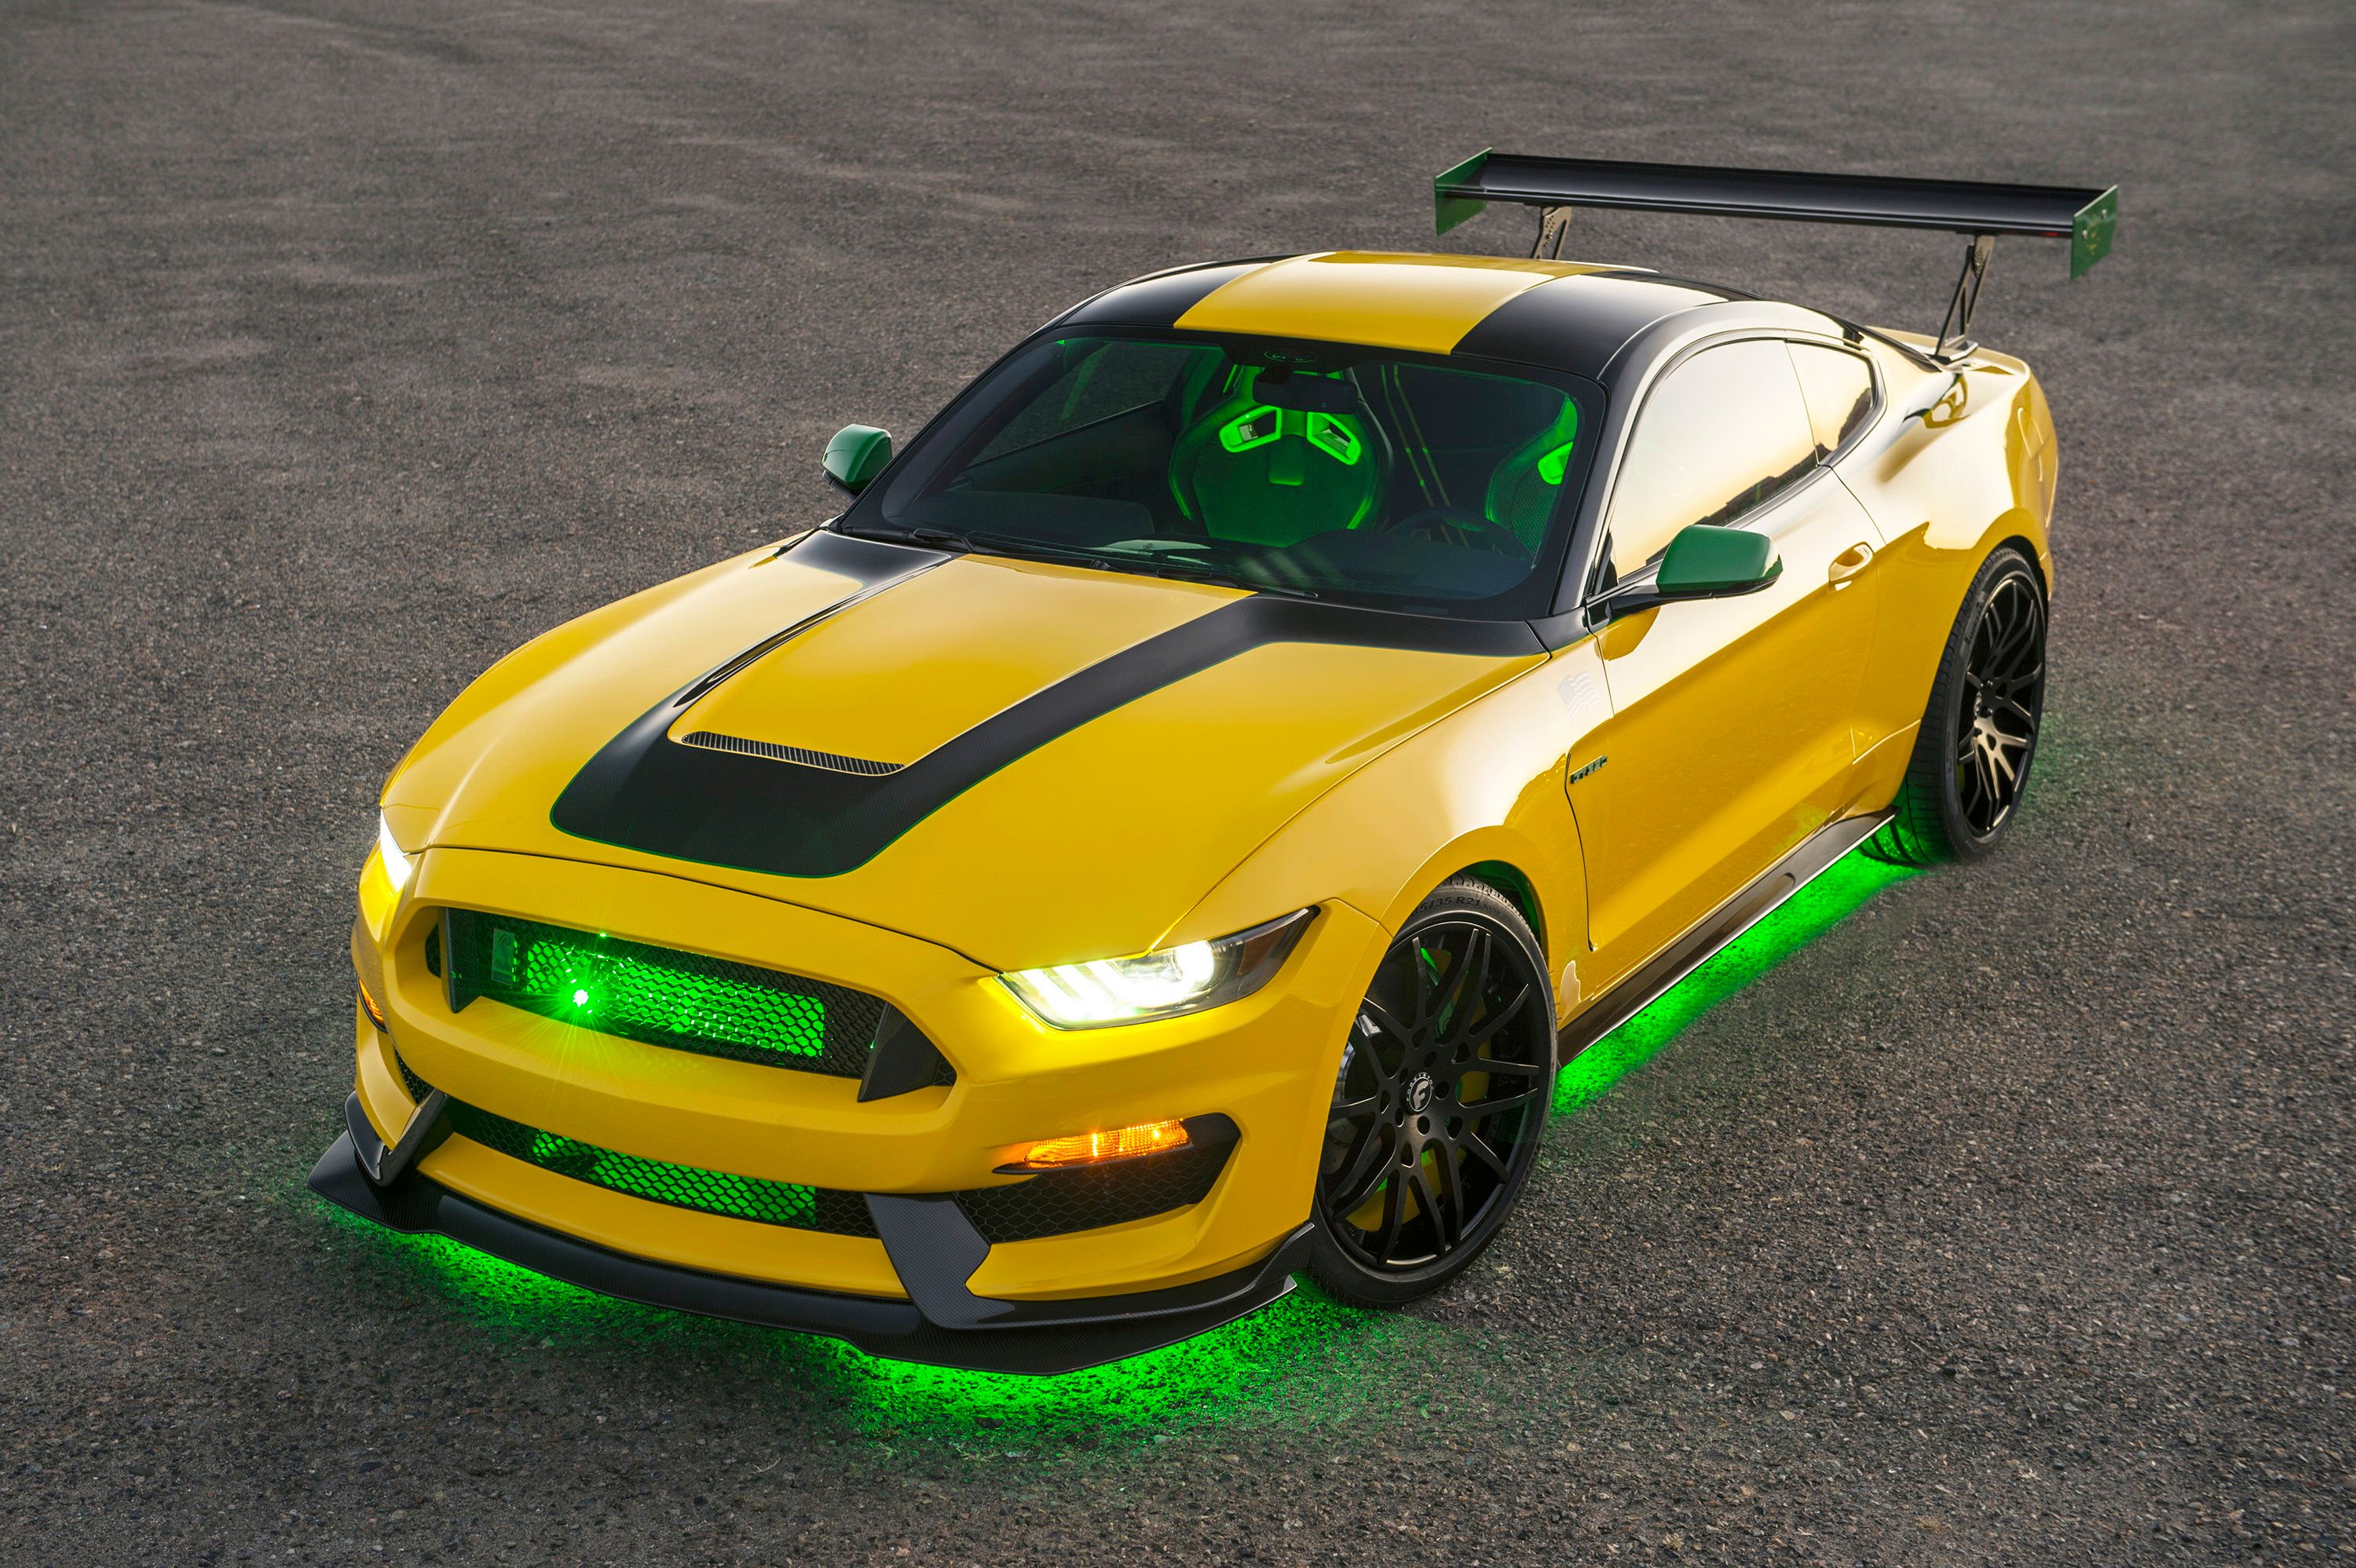 2016 Ford “Ole Yeller” Mustang Shelby GT350